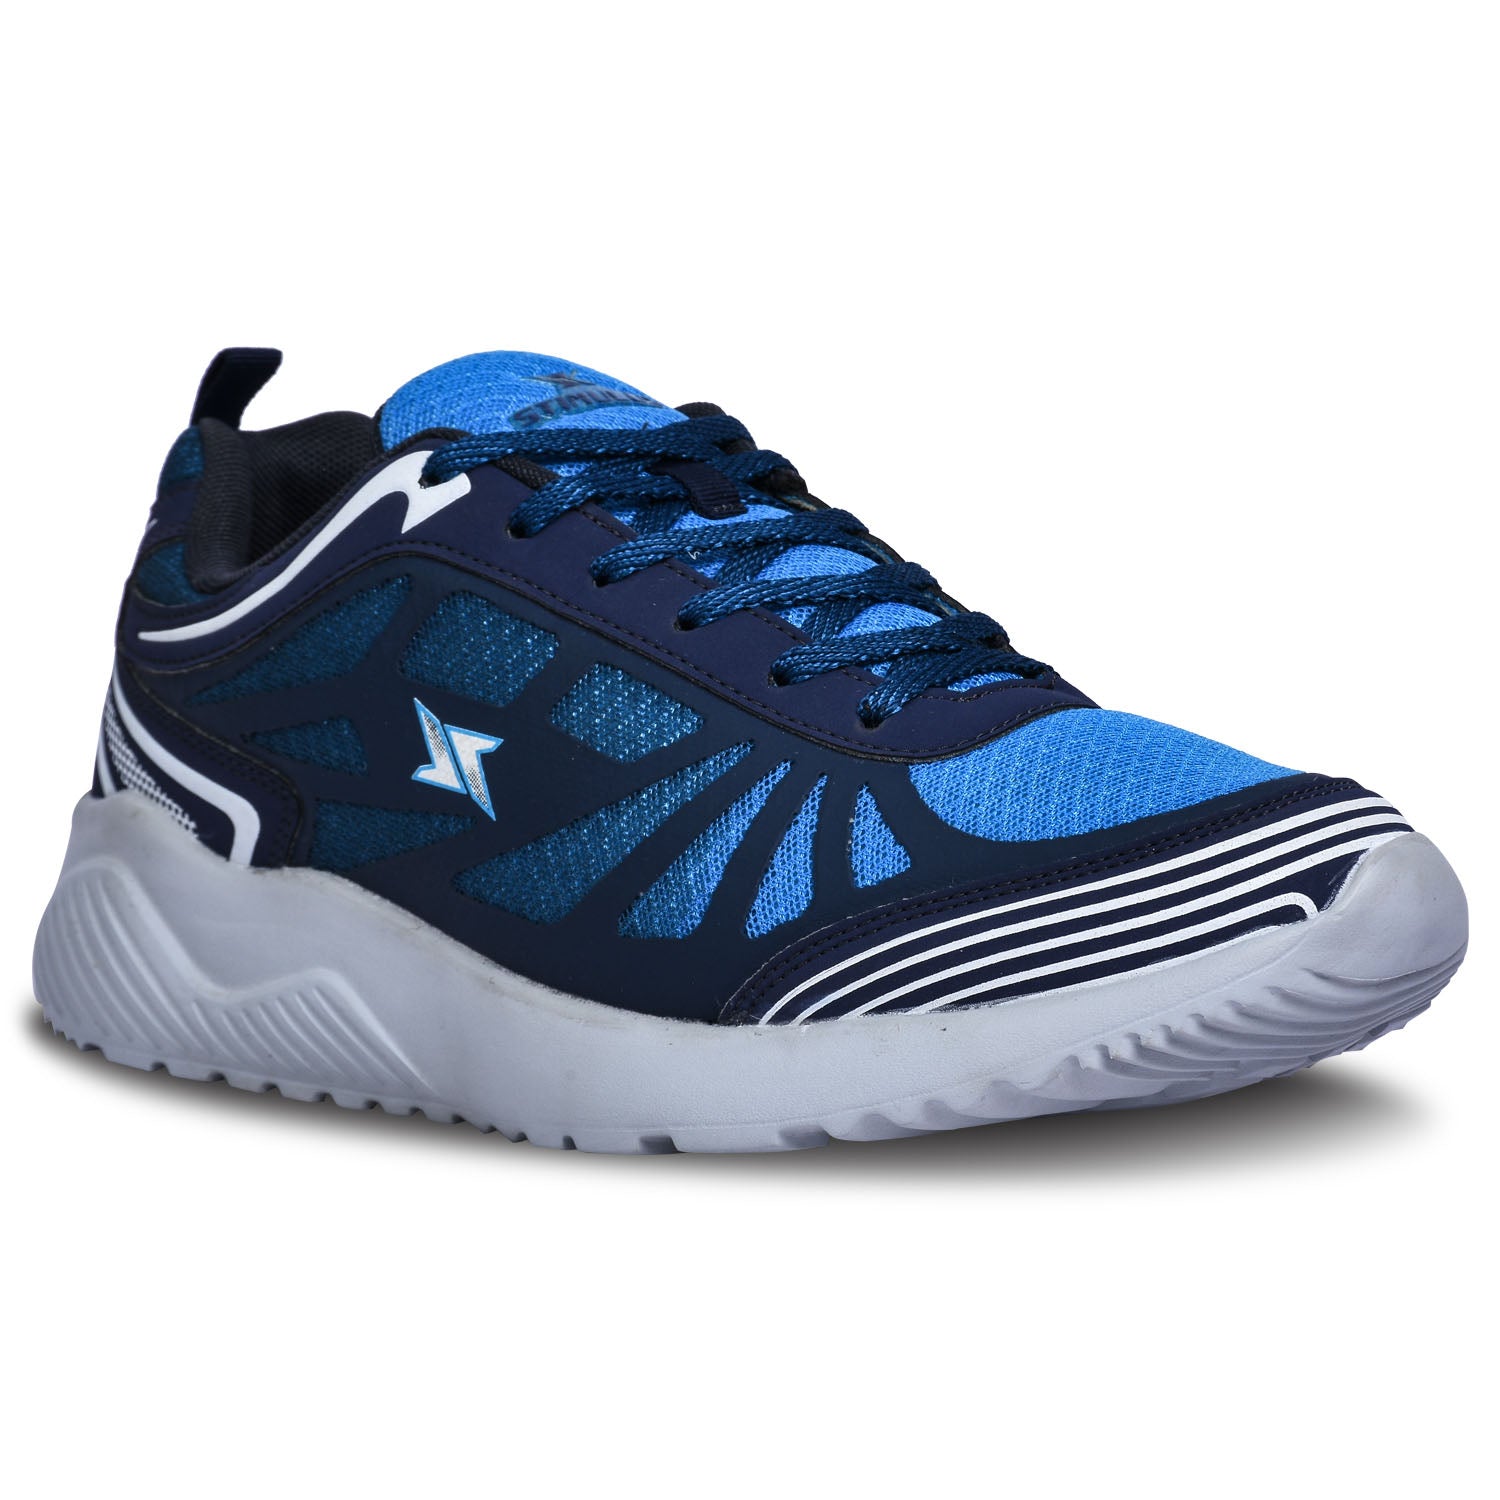 Paragon K1214G Men Casual Shoes | Stylish Walking Outdoor Shoes for Everyday Wear | Smart &amp; Trendy Design  | Comfortable Cushioned Soles Blue